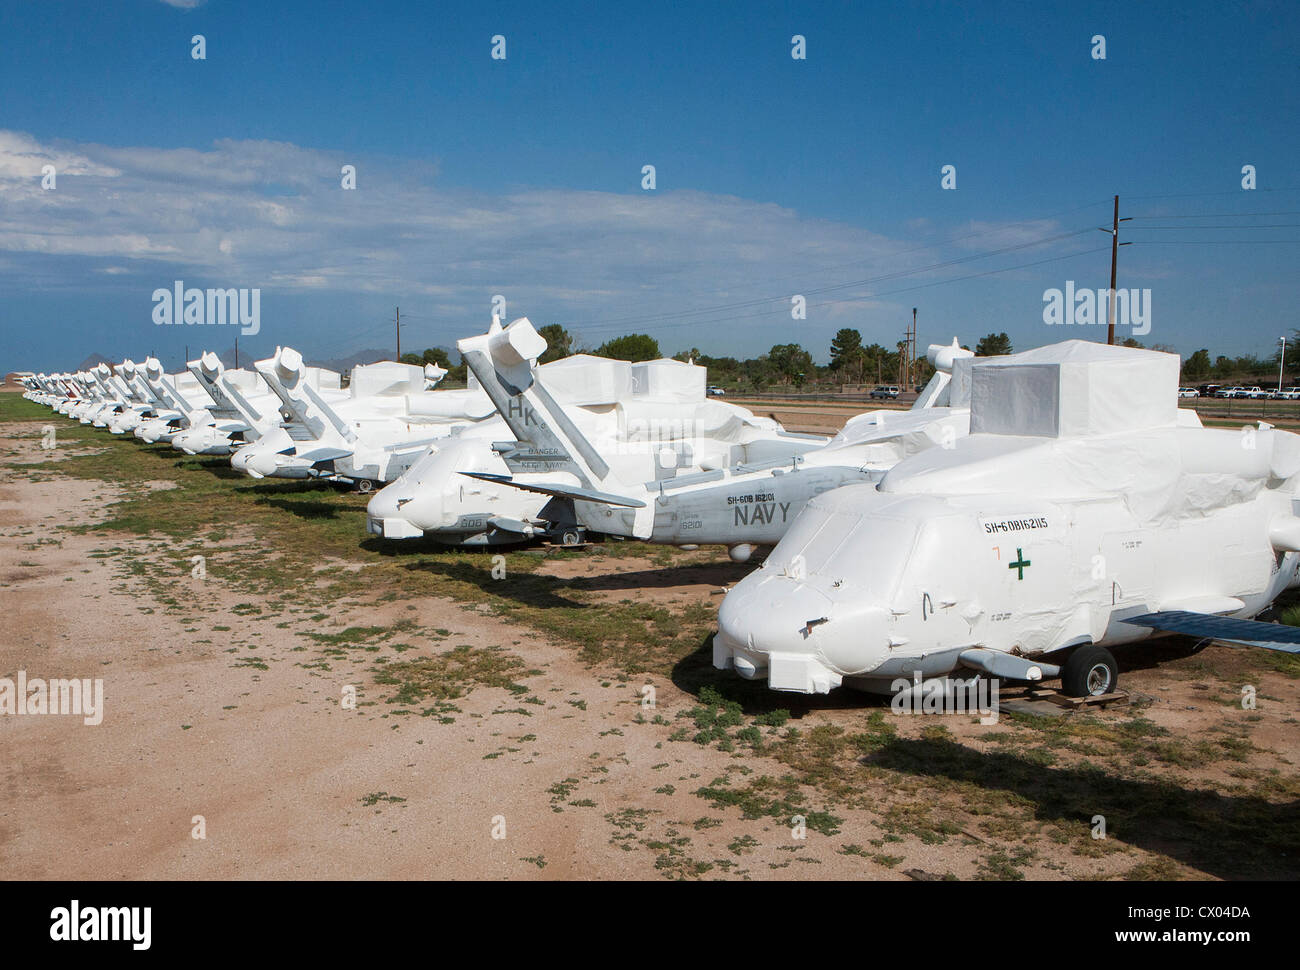 SH-60 Seahawk helicopters in storage at the 309th Aerospace Maintenance and Regeneration Group at Davis-Monthan Air Force Base. Stock Photo